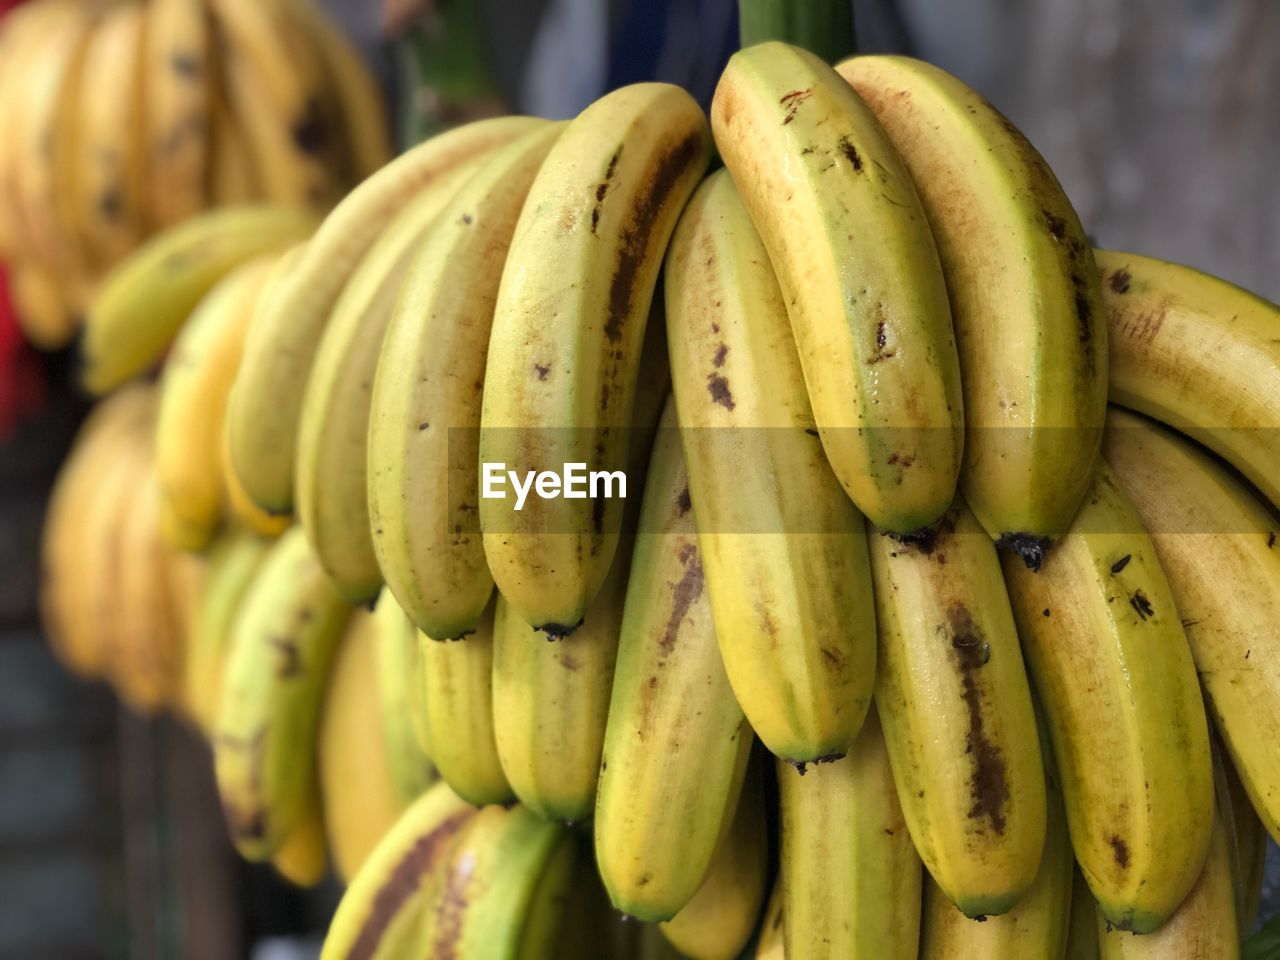 CLOSE-UP OF BANANAS IN MARKET